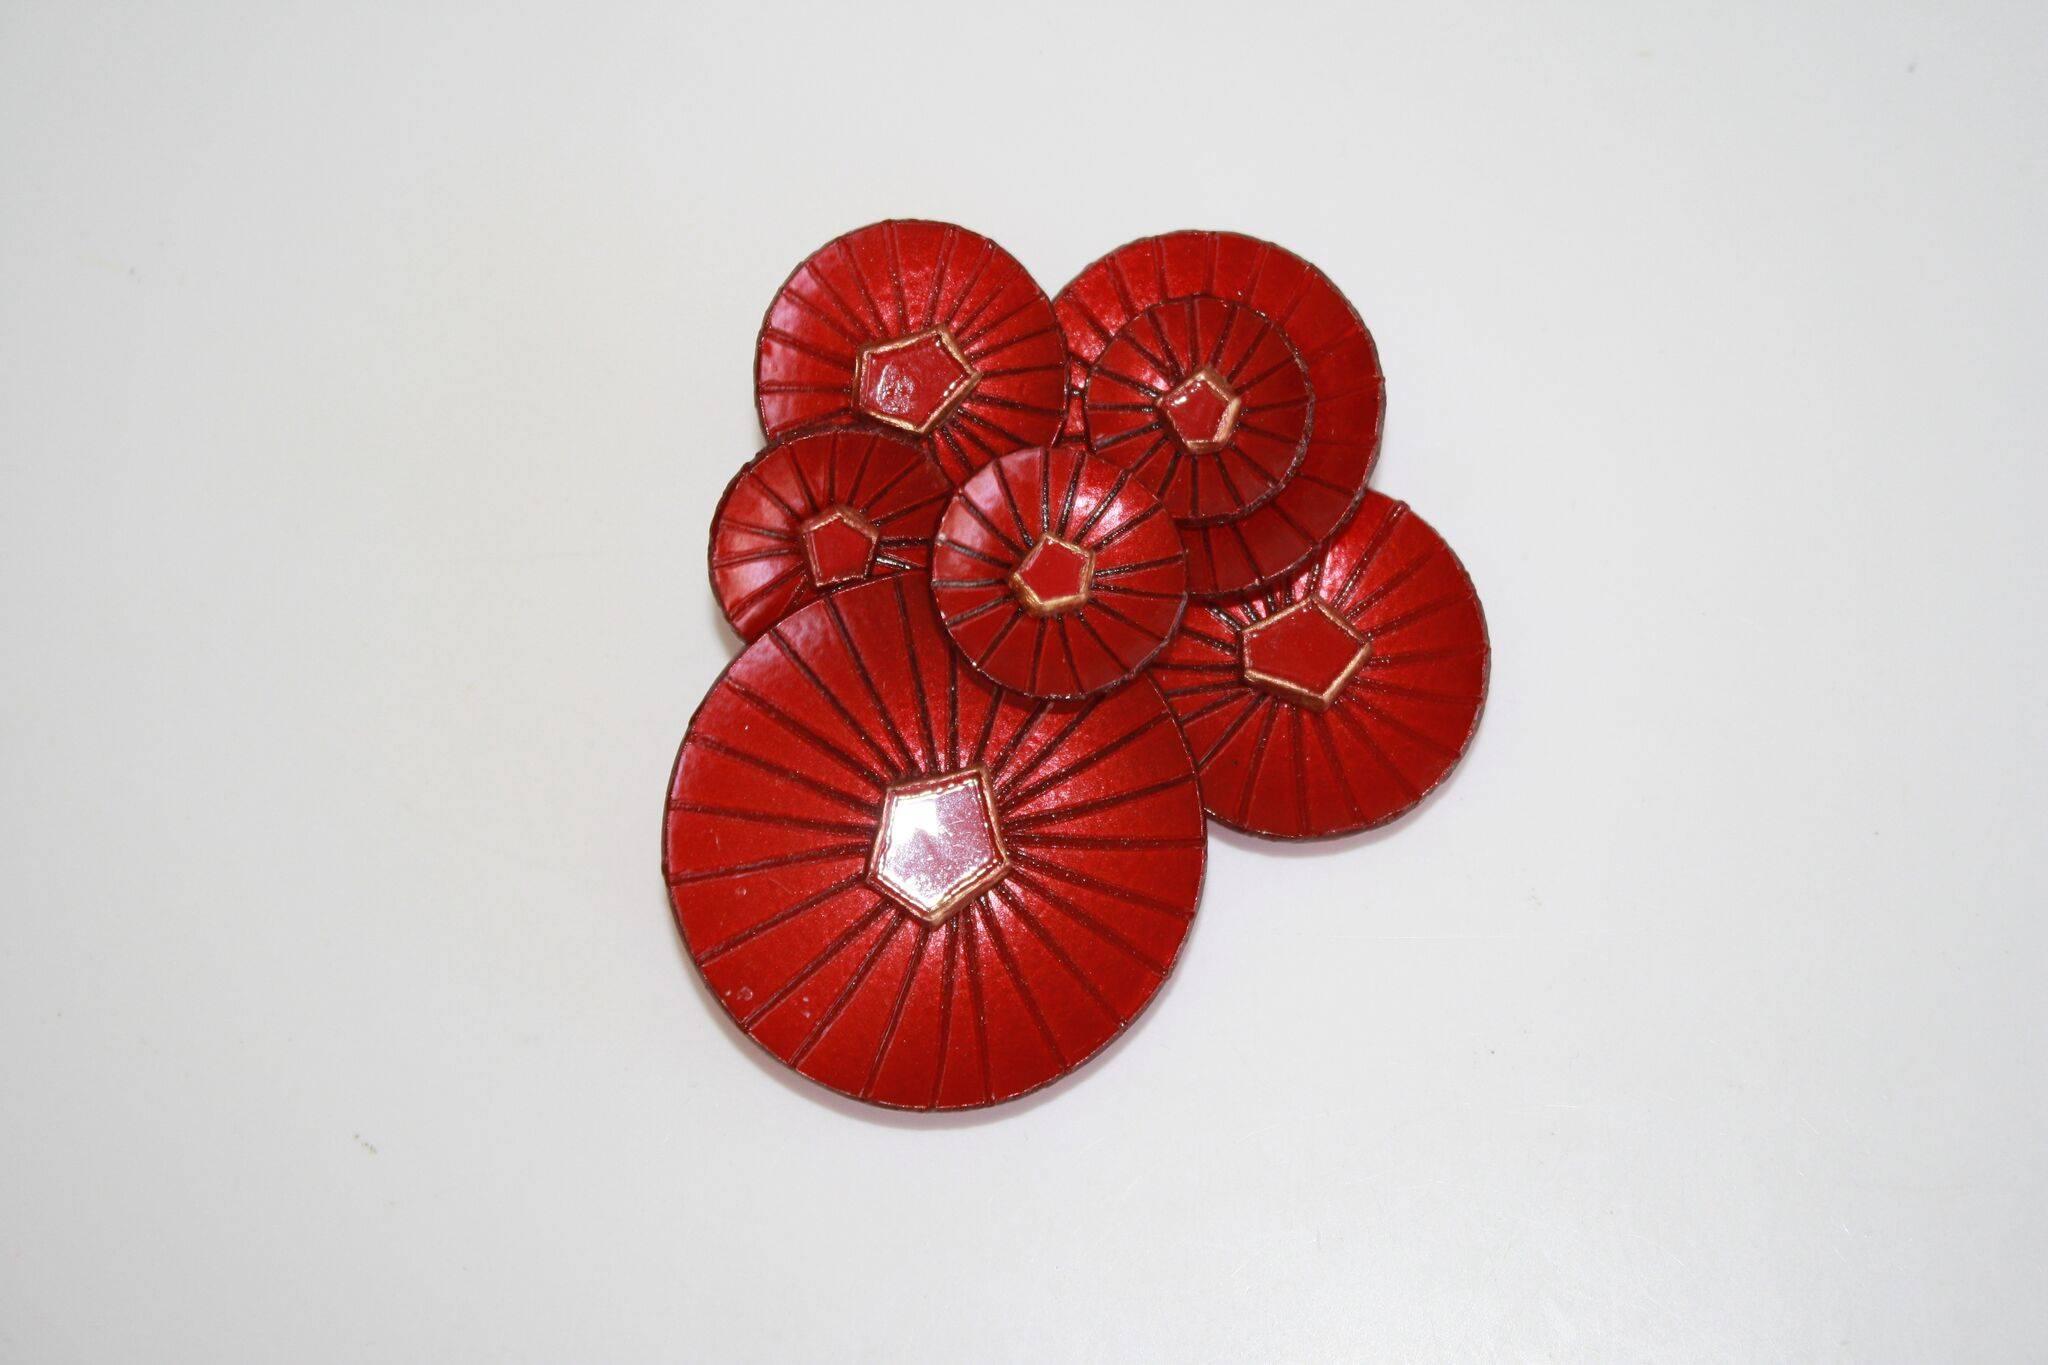 Lightweight and gorgeous resin Kyoto pin from French company Cilea.

3.5